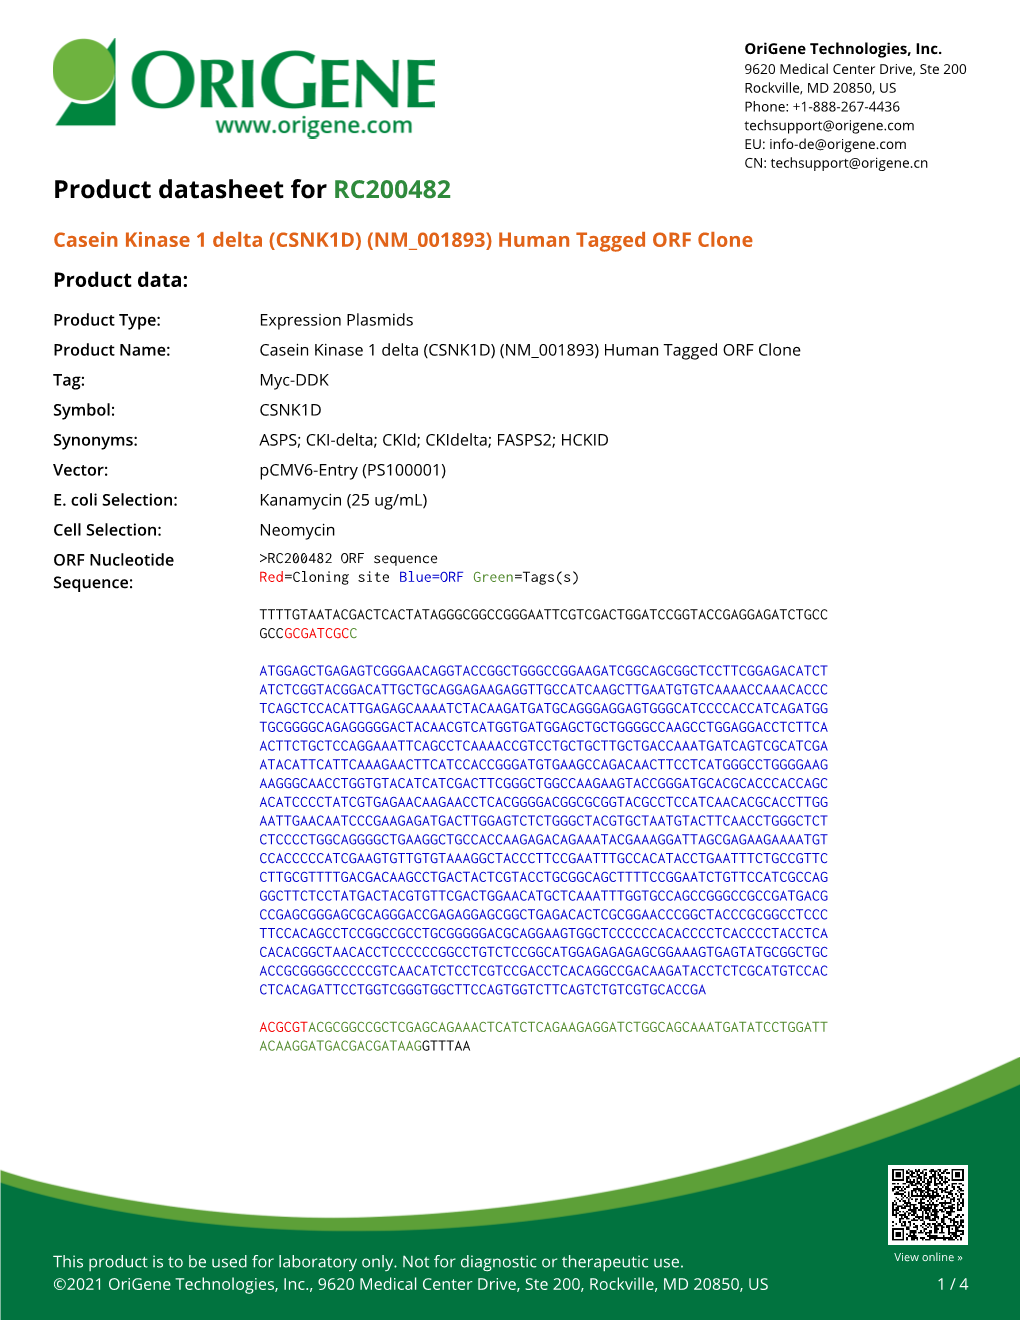 Casein Kinase 1 Delta (CSNK1D) (NM 001893) Human Tagged ORF Clone Product Data